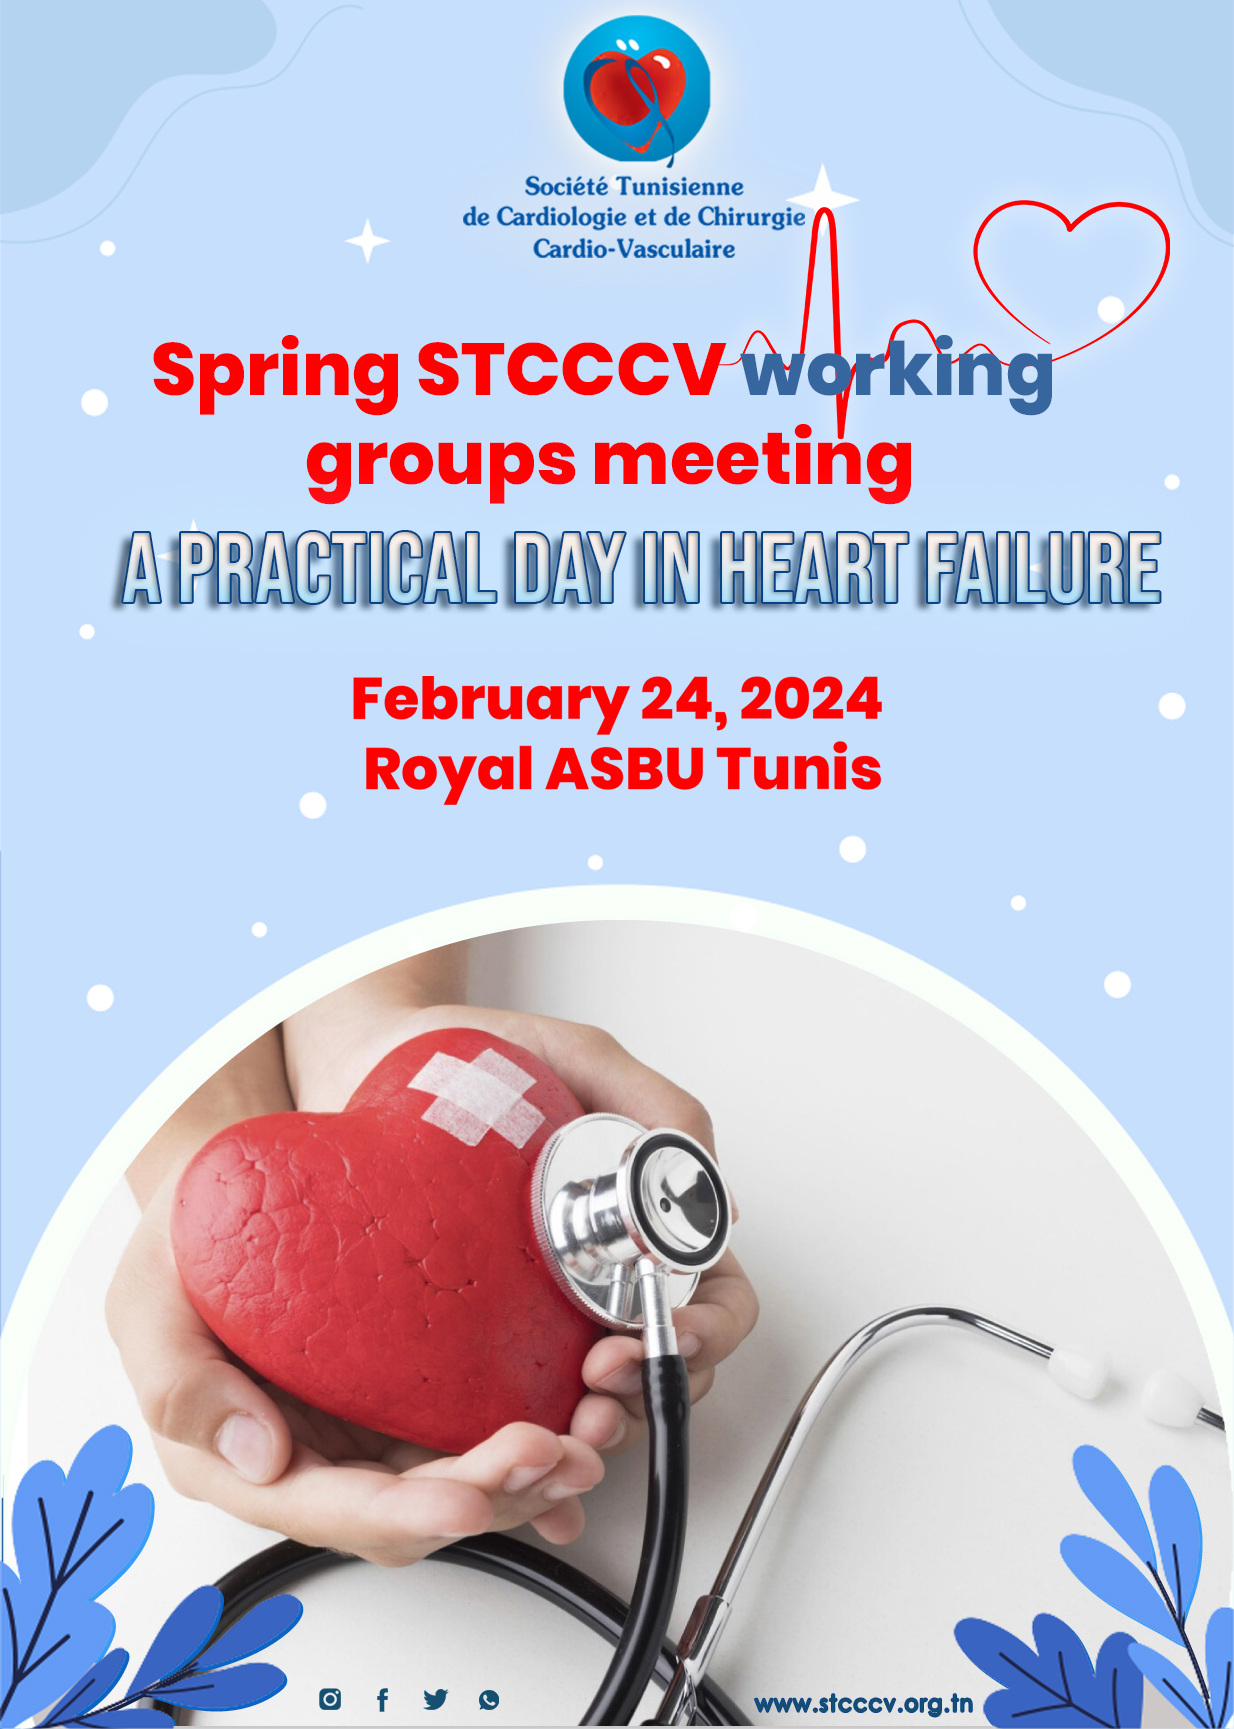 Spring STCCCV working groups meeting - A practical day in heart failure